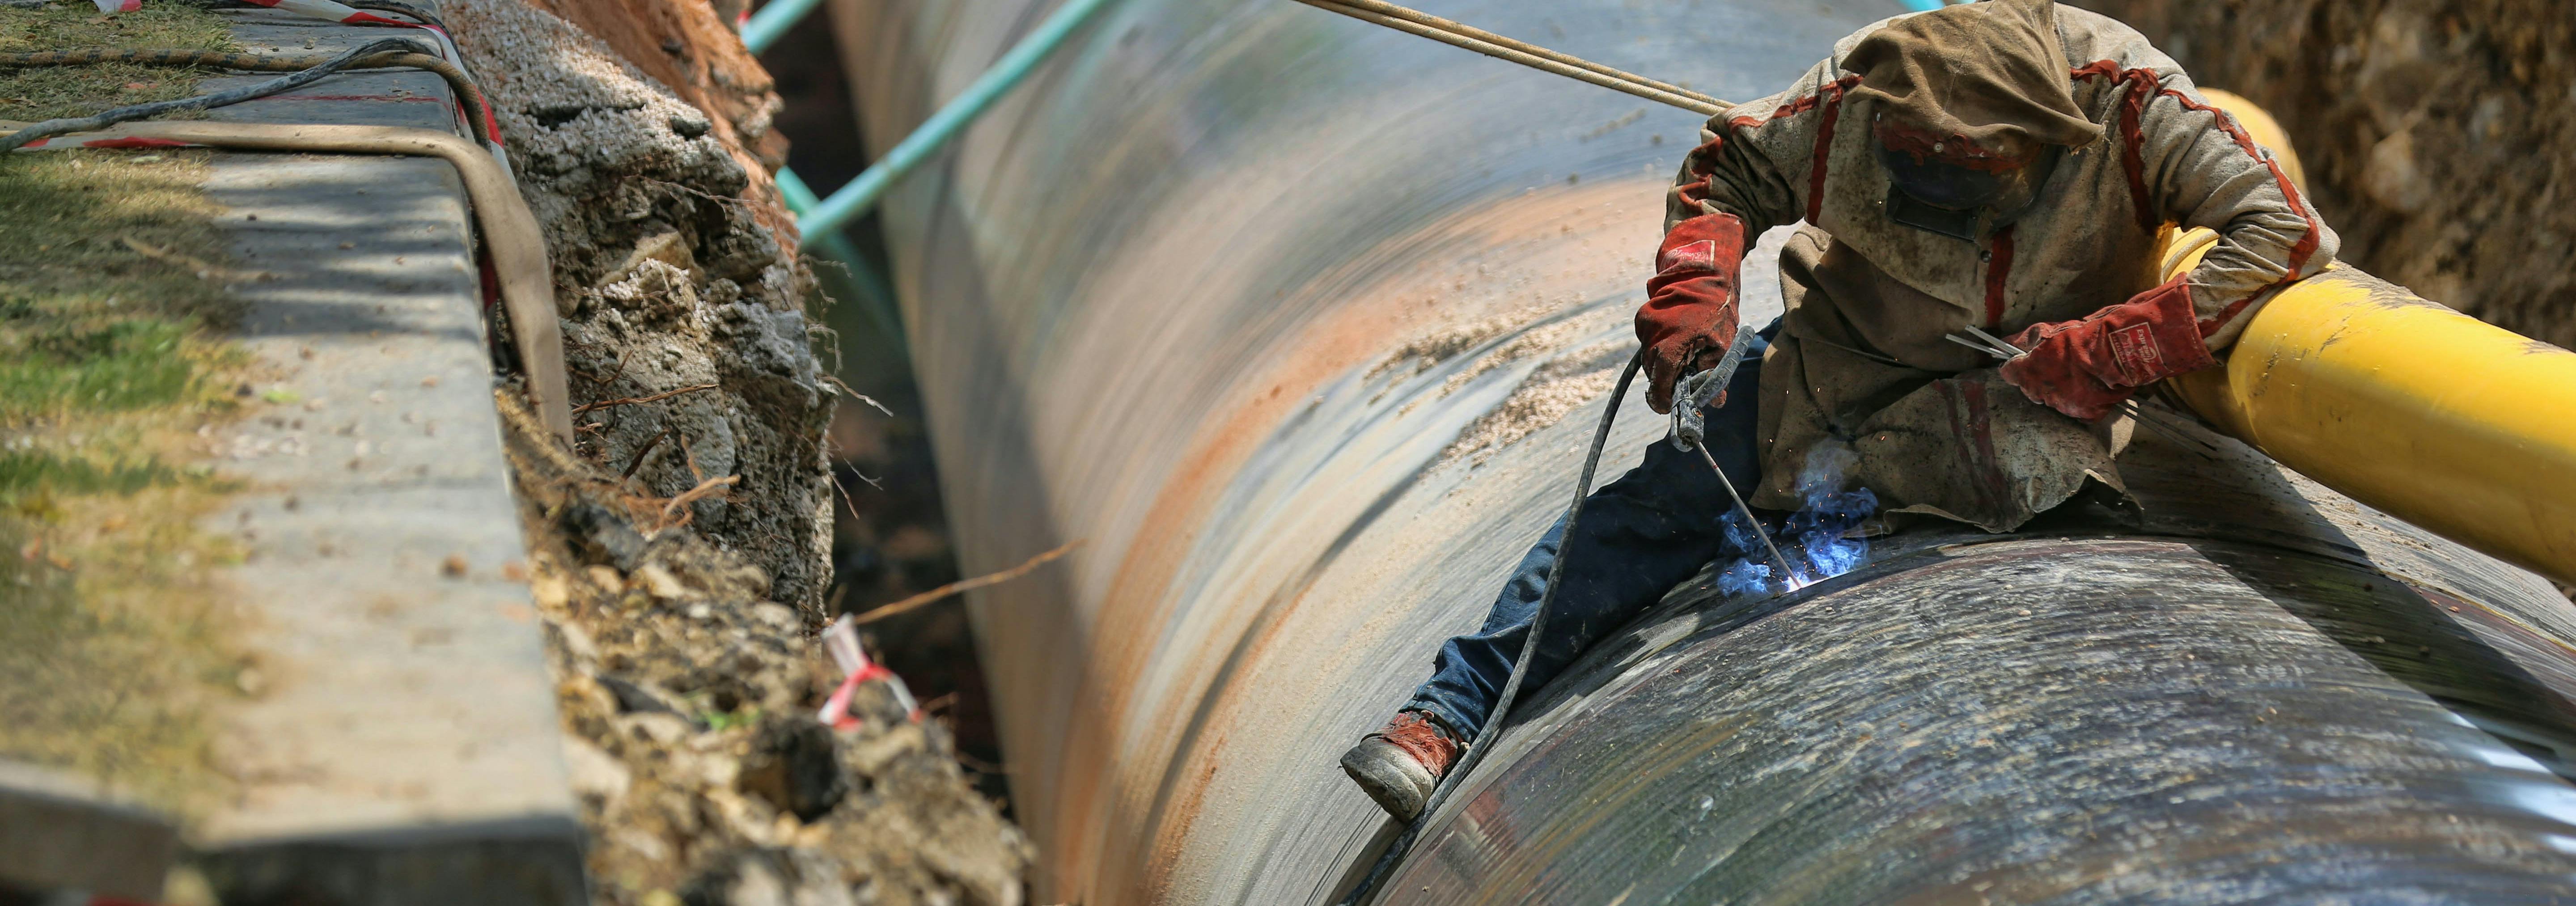 image of worker working on an underground pipeline